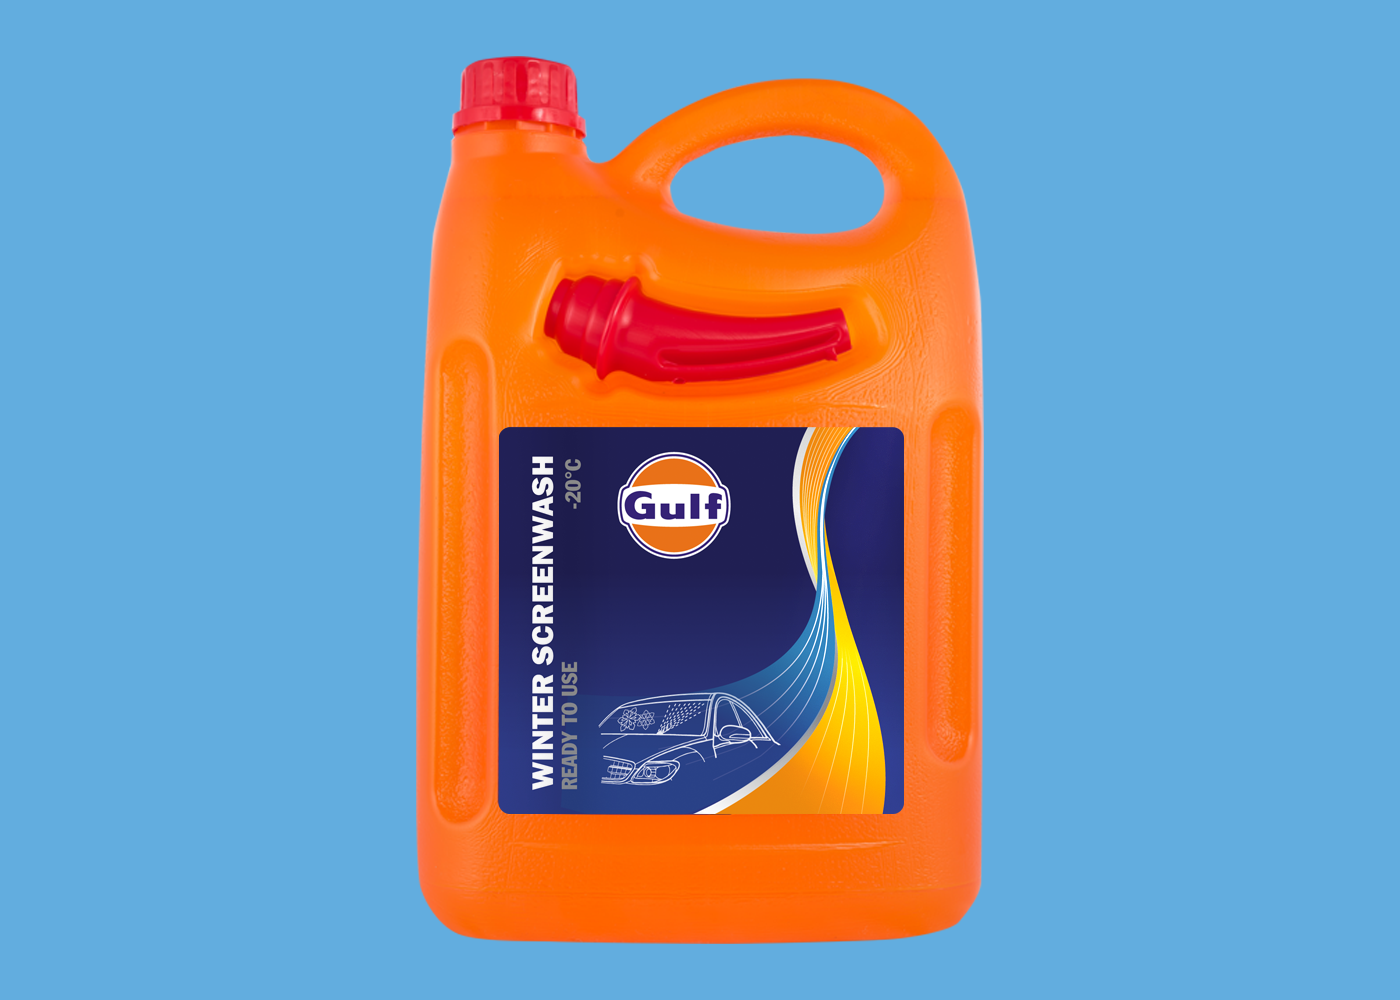 Image of Successful Global Product Launch for Gulf Oil